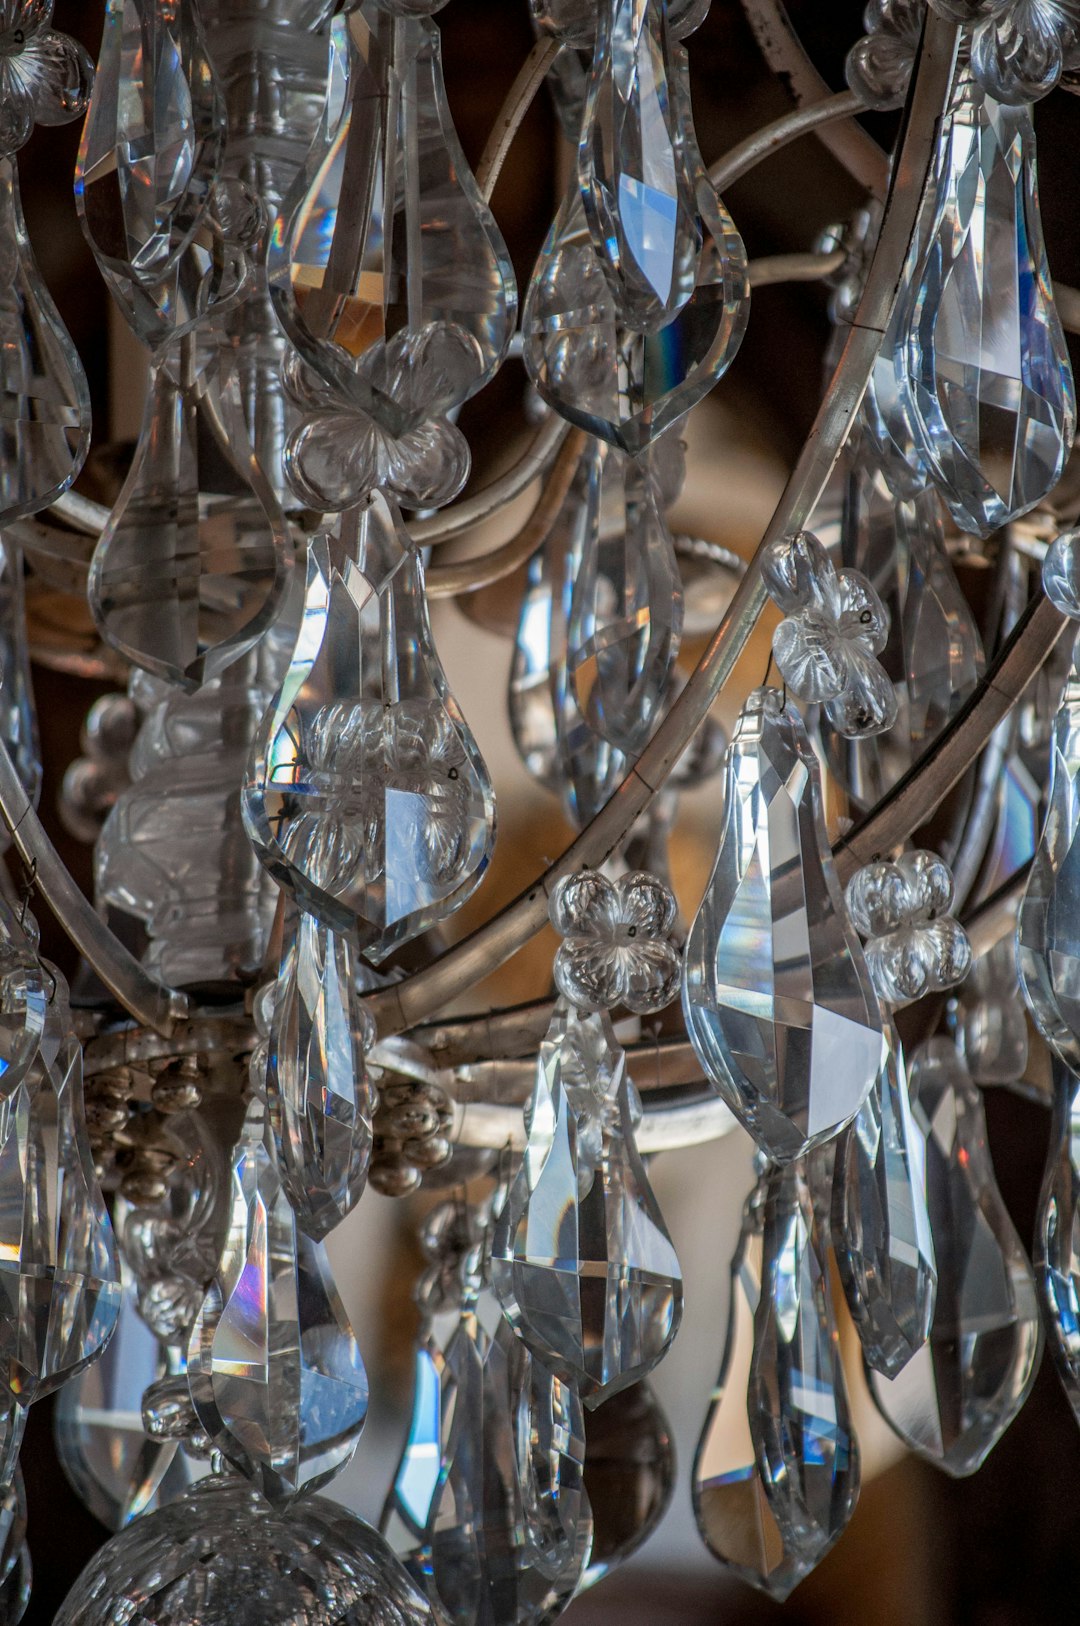  clear glass hanging decor in close up photography chandelier